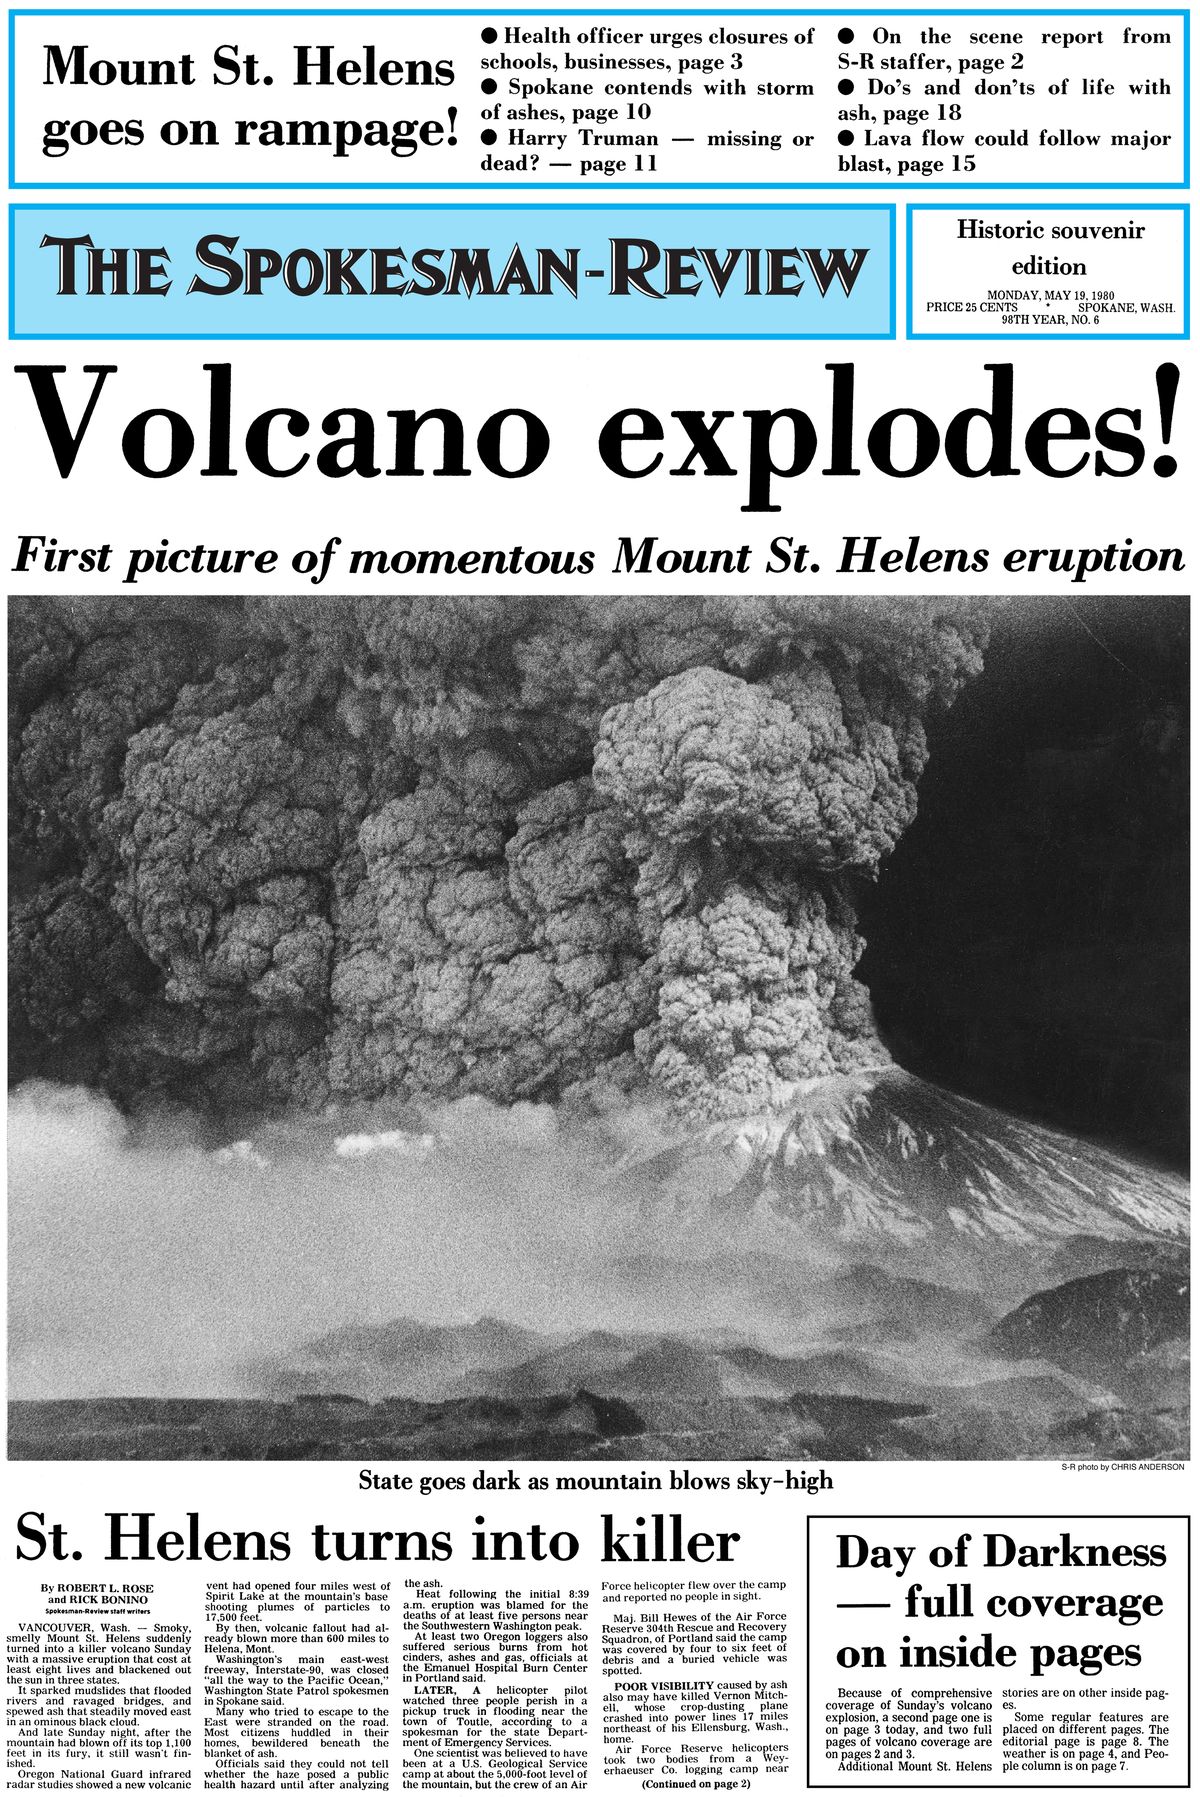 Front page of The Spokesman-Review on May 19, 1980, the day after Mount St. Helens erupted. (The Spokesman-Review)